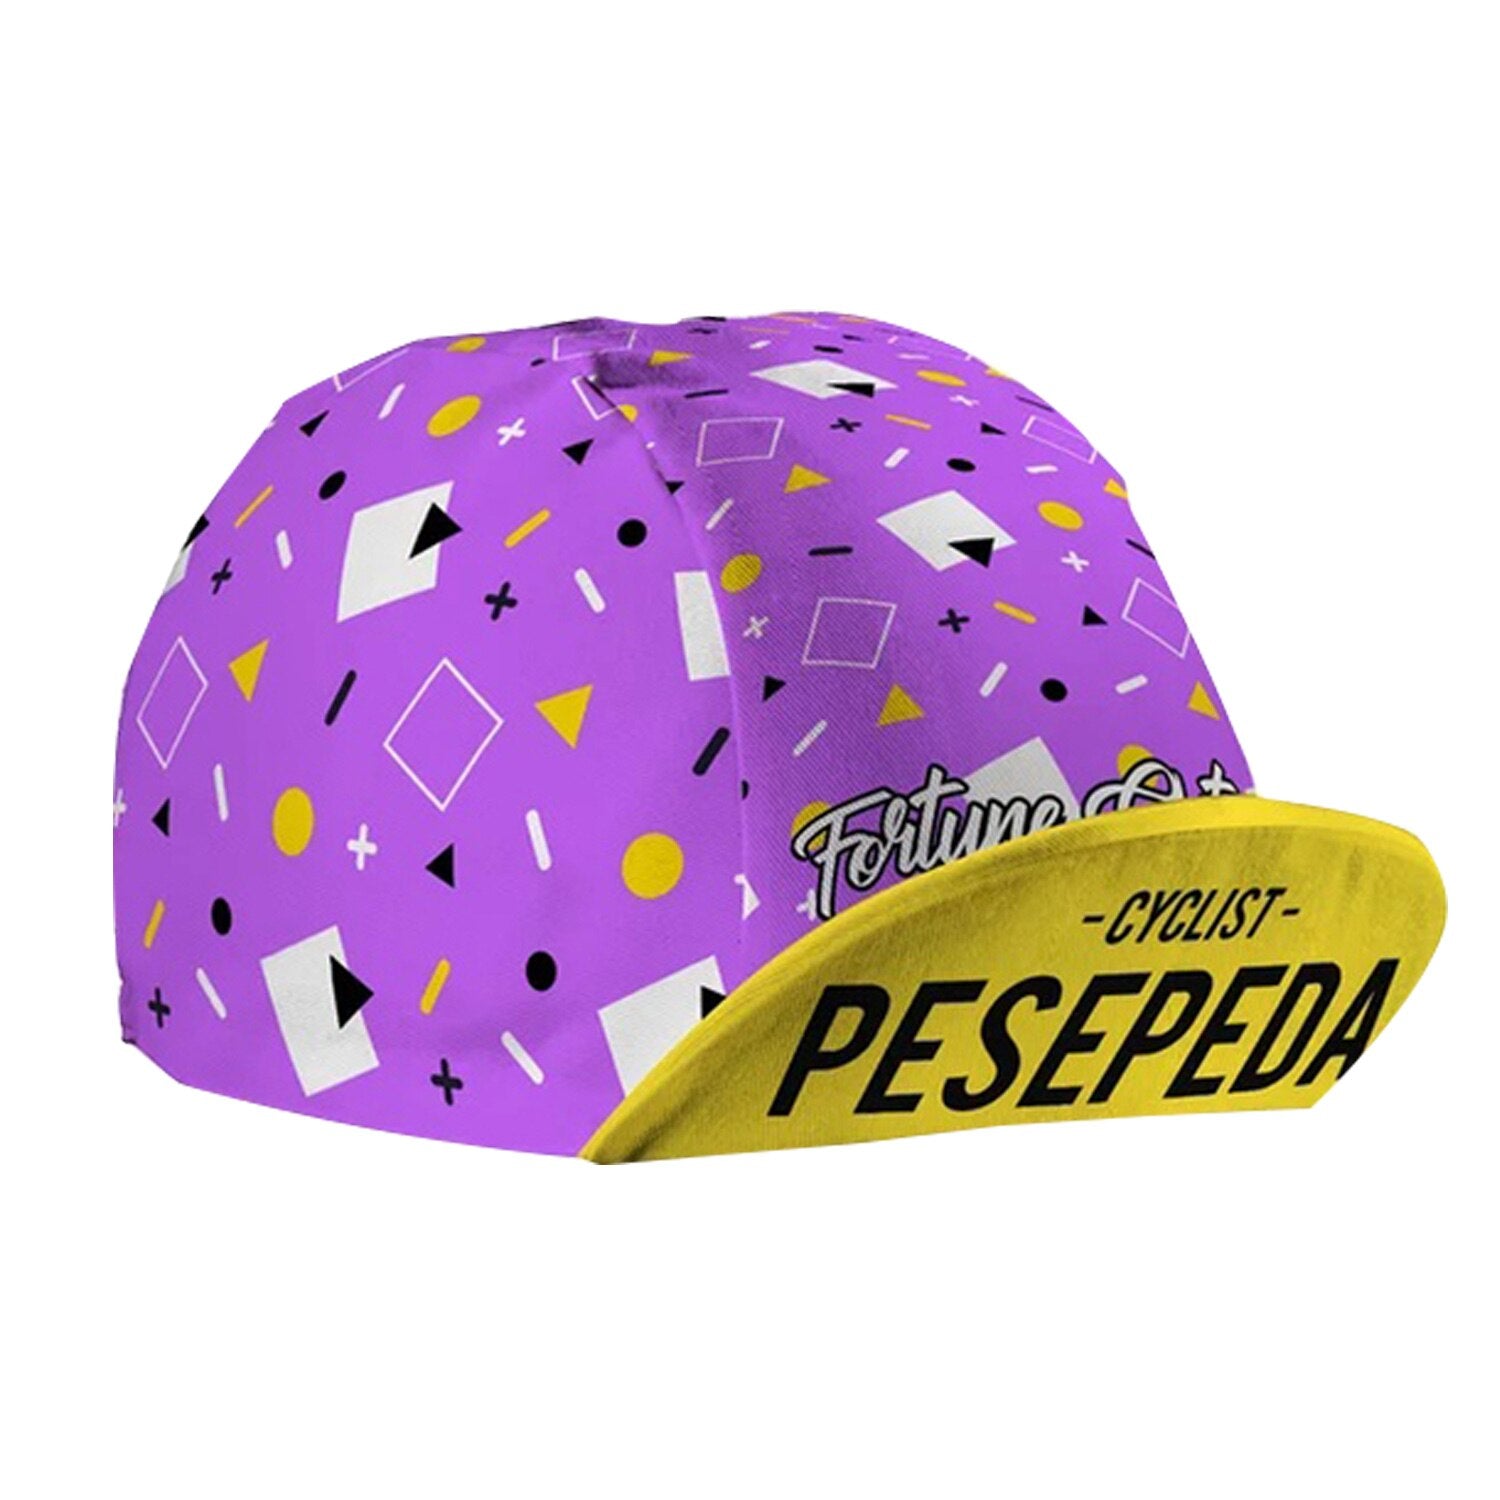 CYCLIST PESEPEDA CYCLING CAP